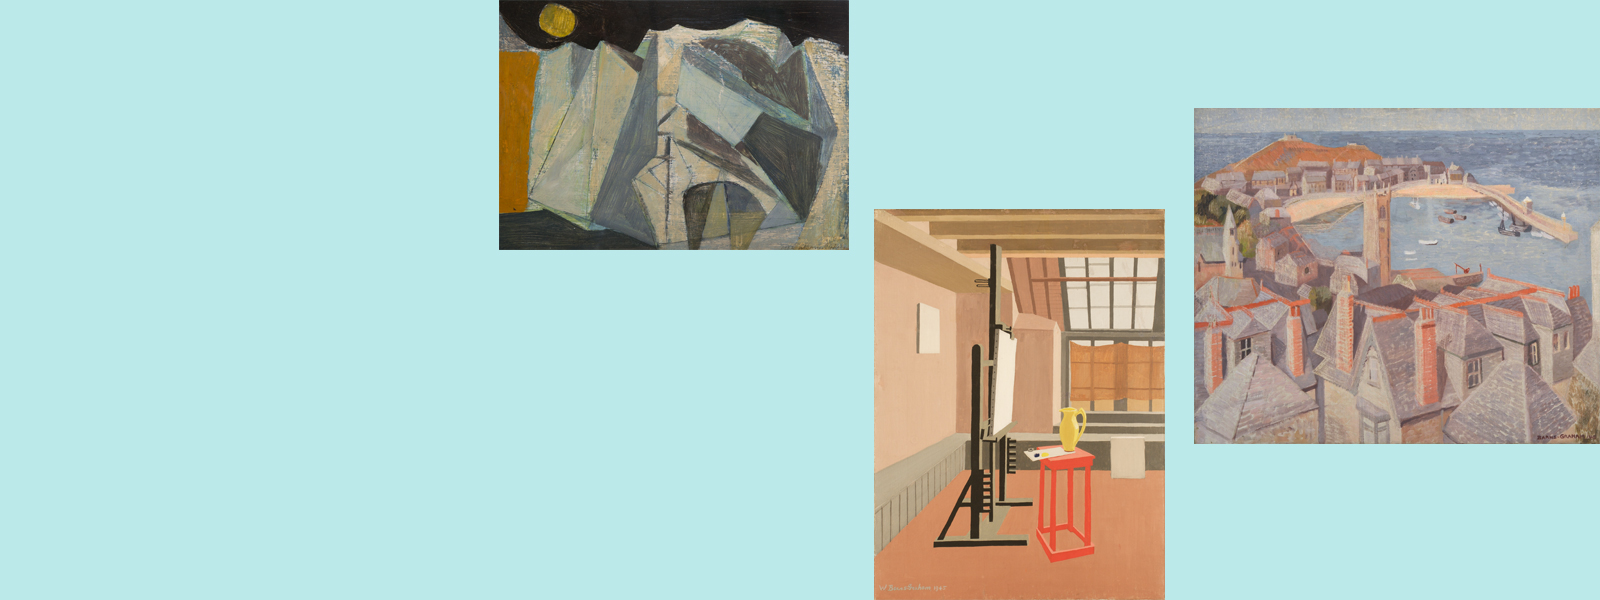 Three paintings grouped on a pale blue background. From left to right: an oil painting of abstracted geometric forms representing a cliff in pale shades on a dark background with yellow circle in top left corner; an oil painting of a studio interior in muted salmon shades with a blank canvas on a black easel and yellow jug on a red stool; an oil painting of a harbour with grey rooftops with salmon chimneys in the foreground and sea and horizon in the background.